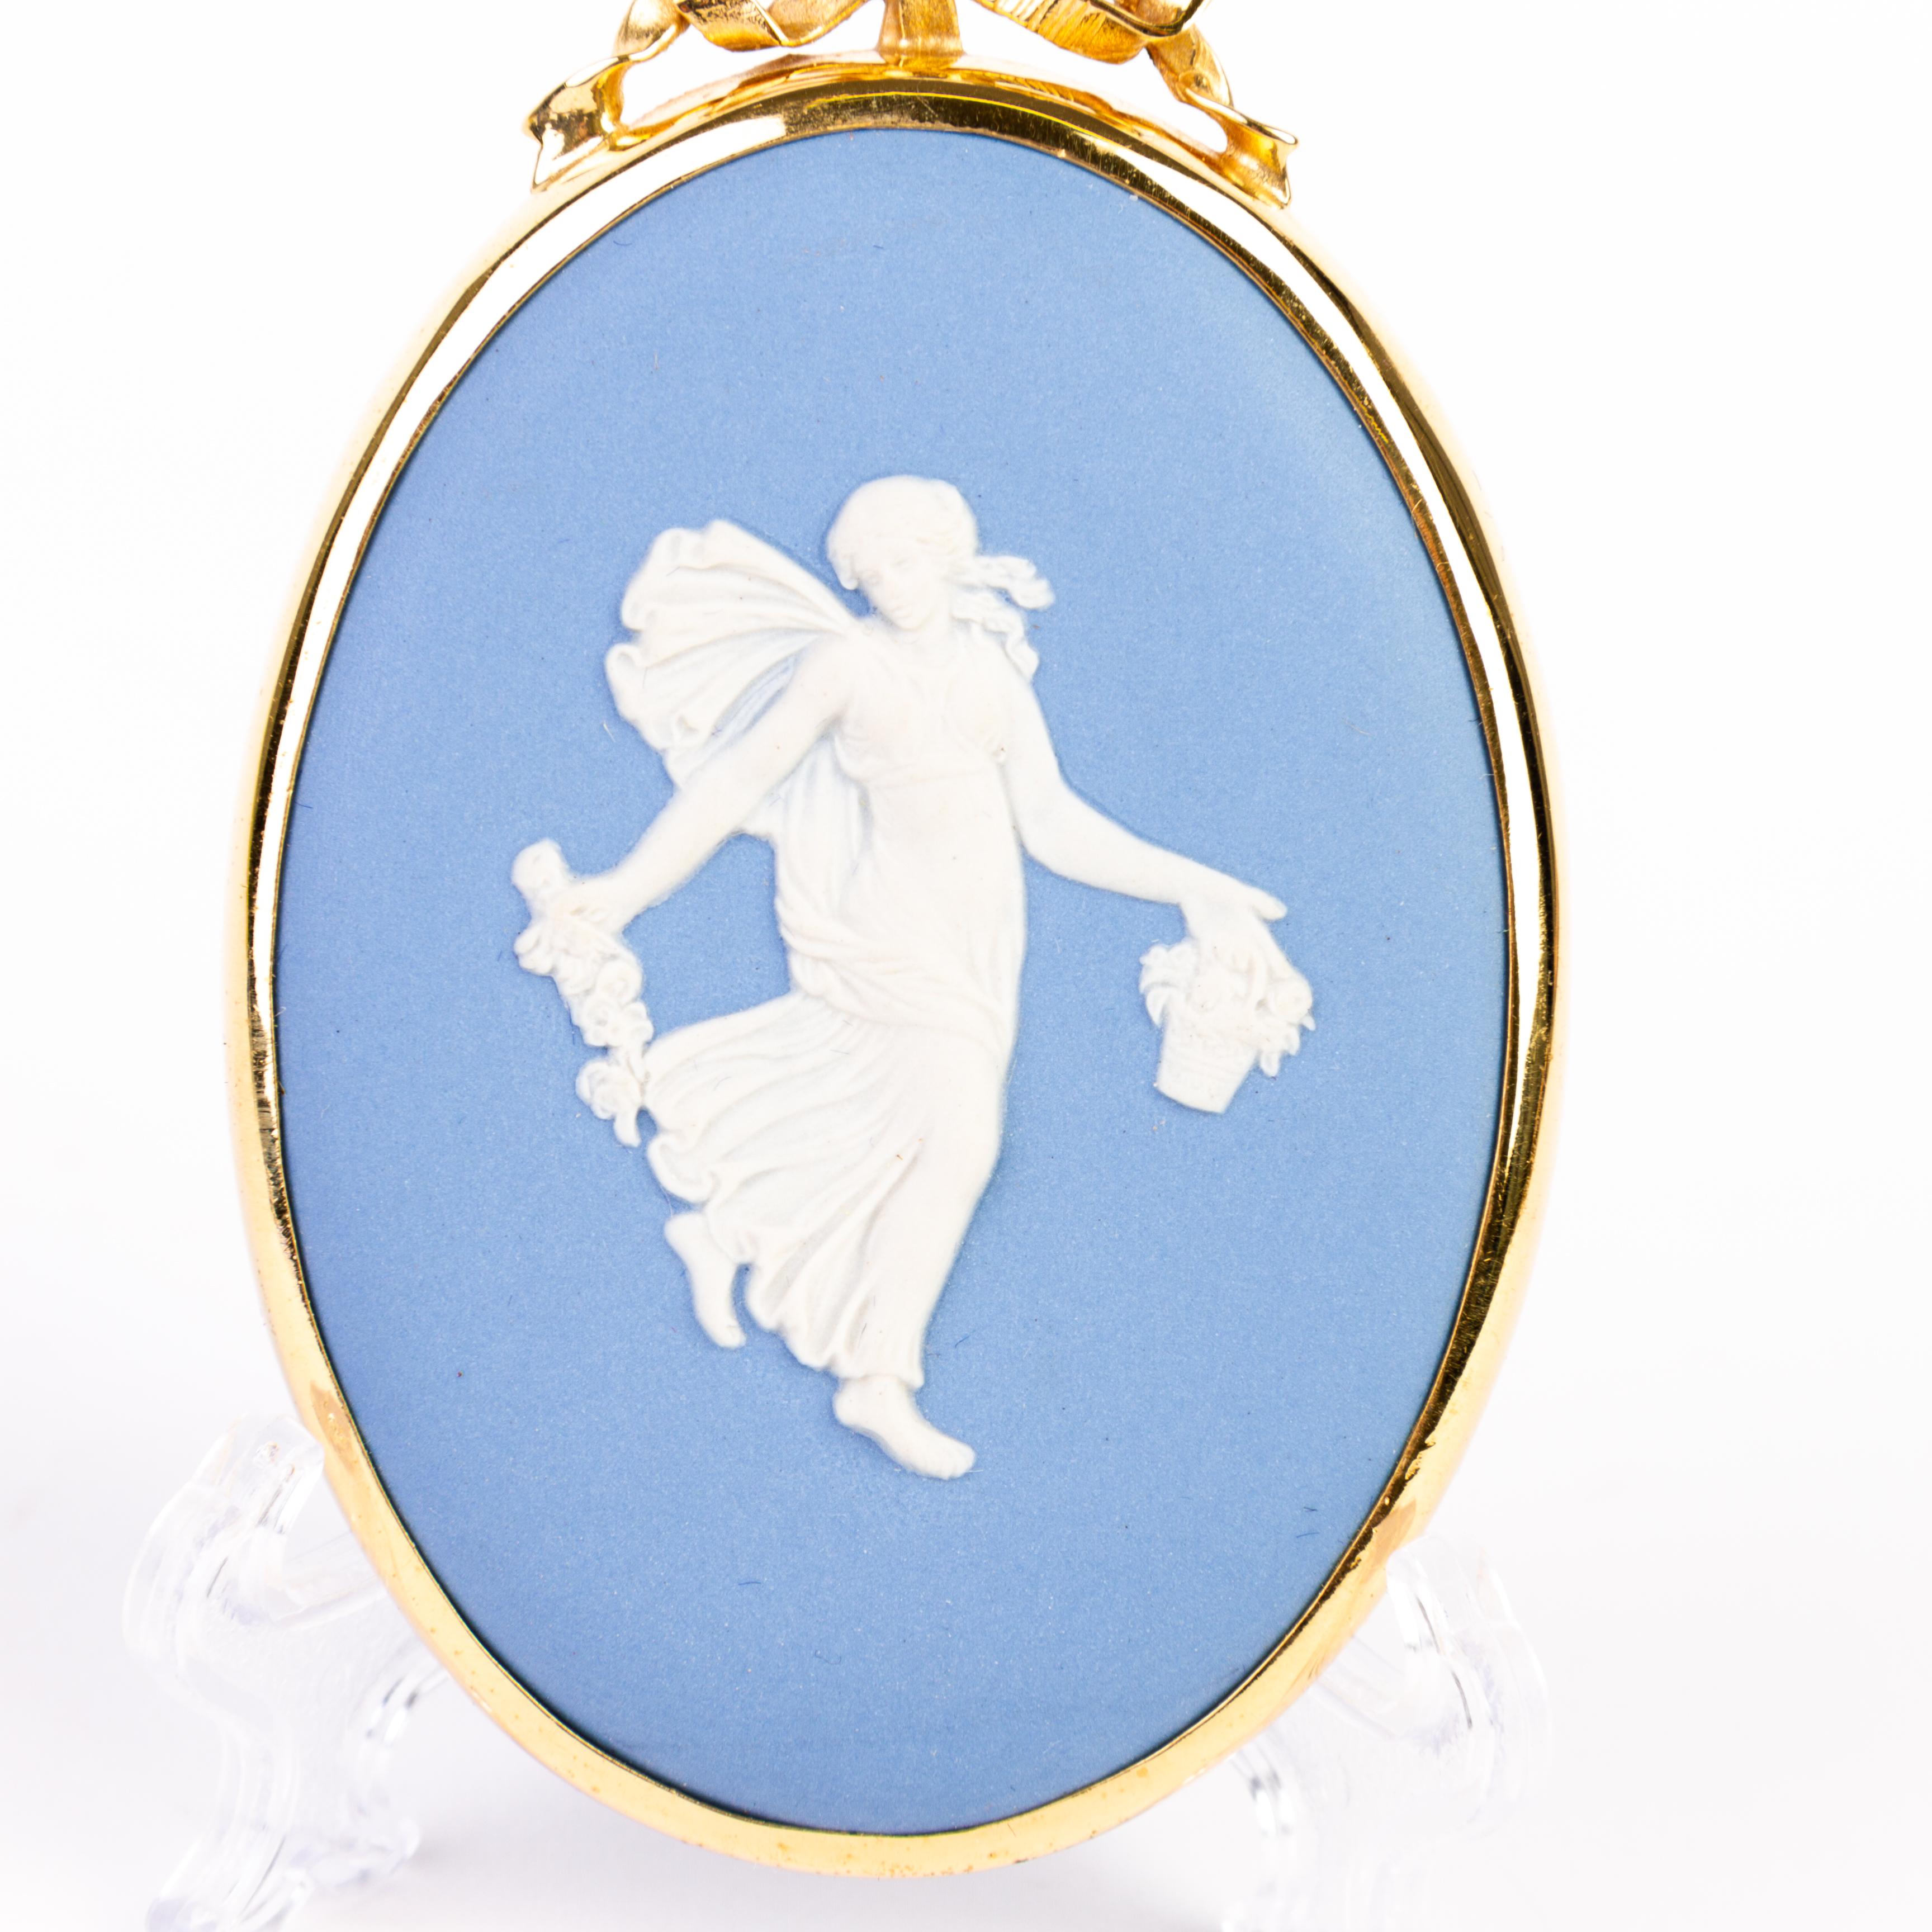 From a private collection.
Free international shipping
Wedgwood Jasperware Dancing Hours Portrait Plaque  